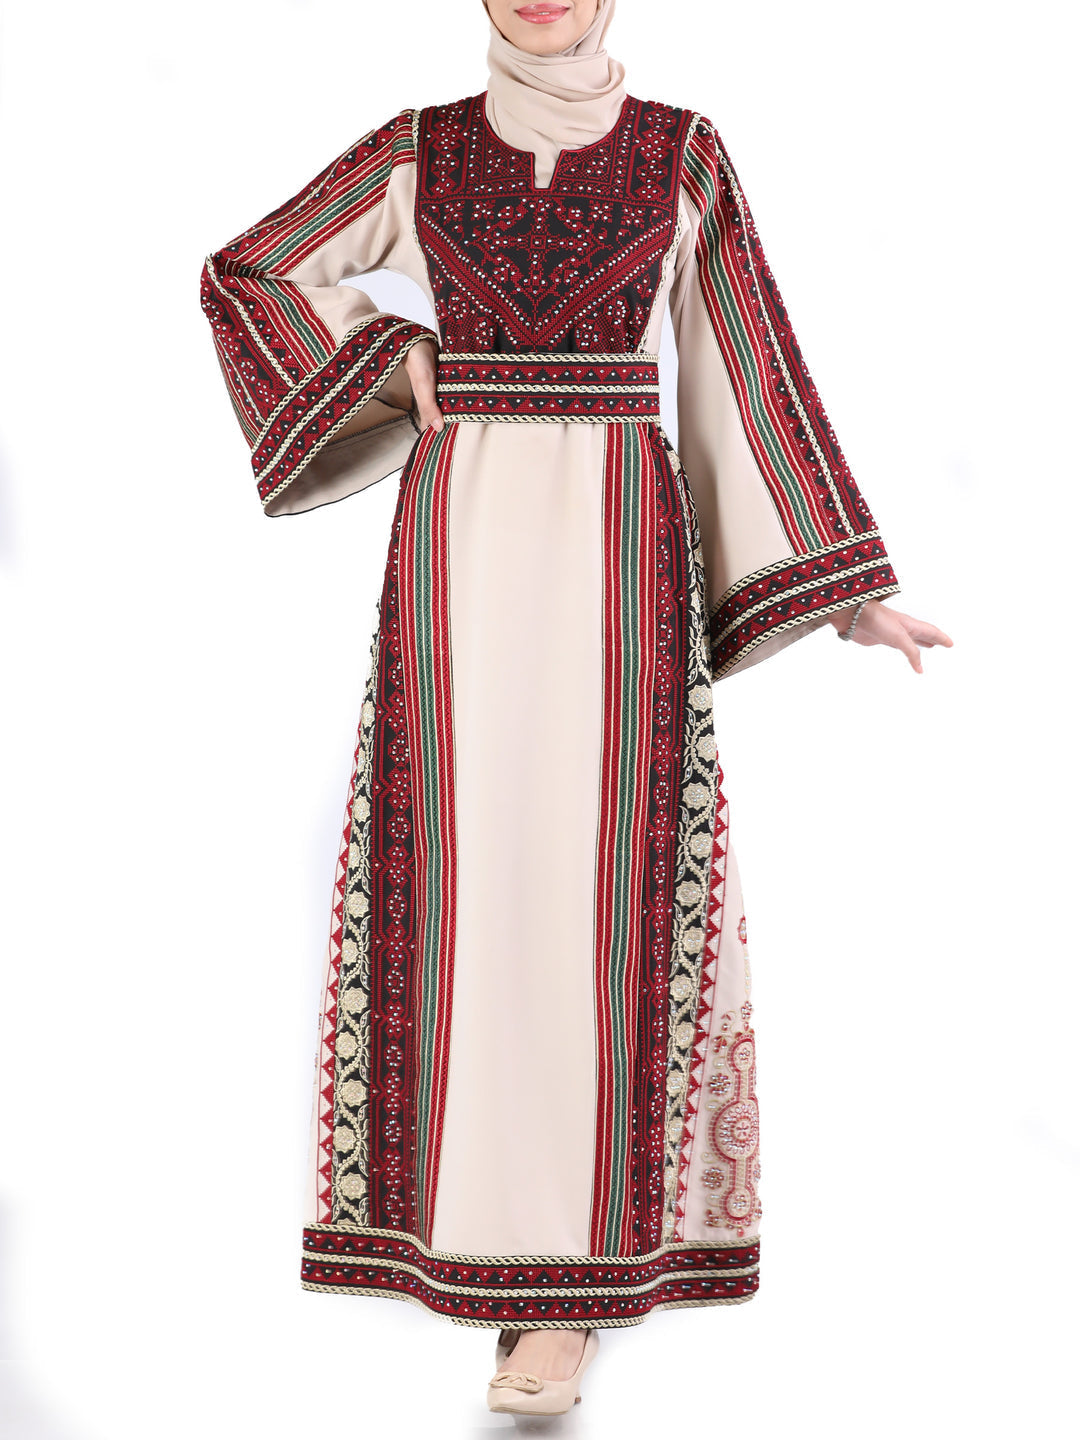 Embroidered Beauty - Very High Quality Traditional Embroidered Palestinian Thobe